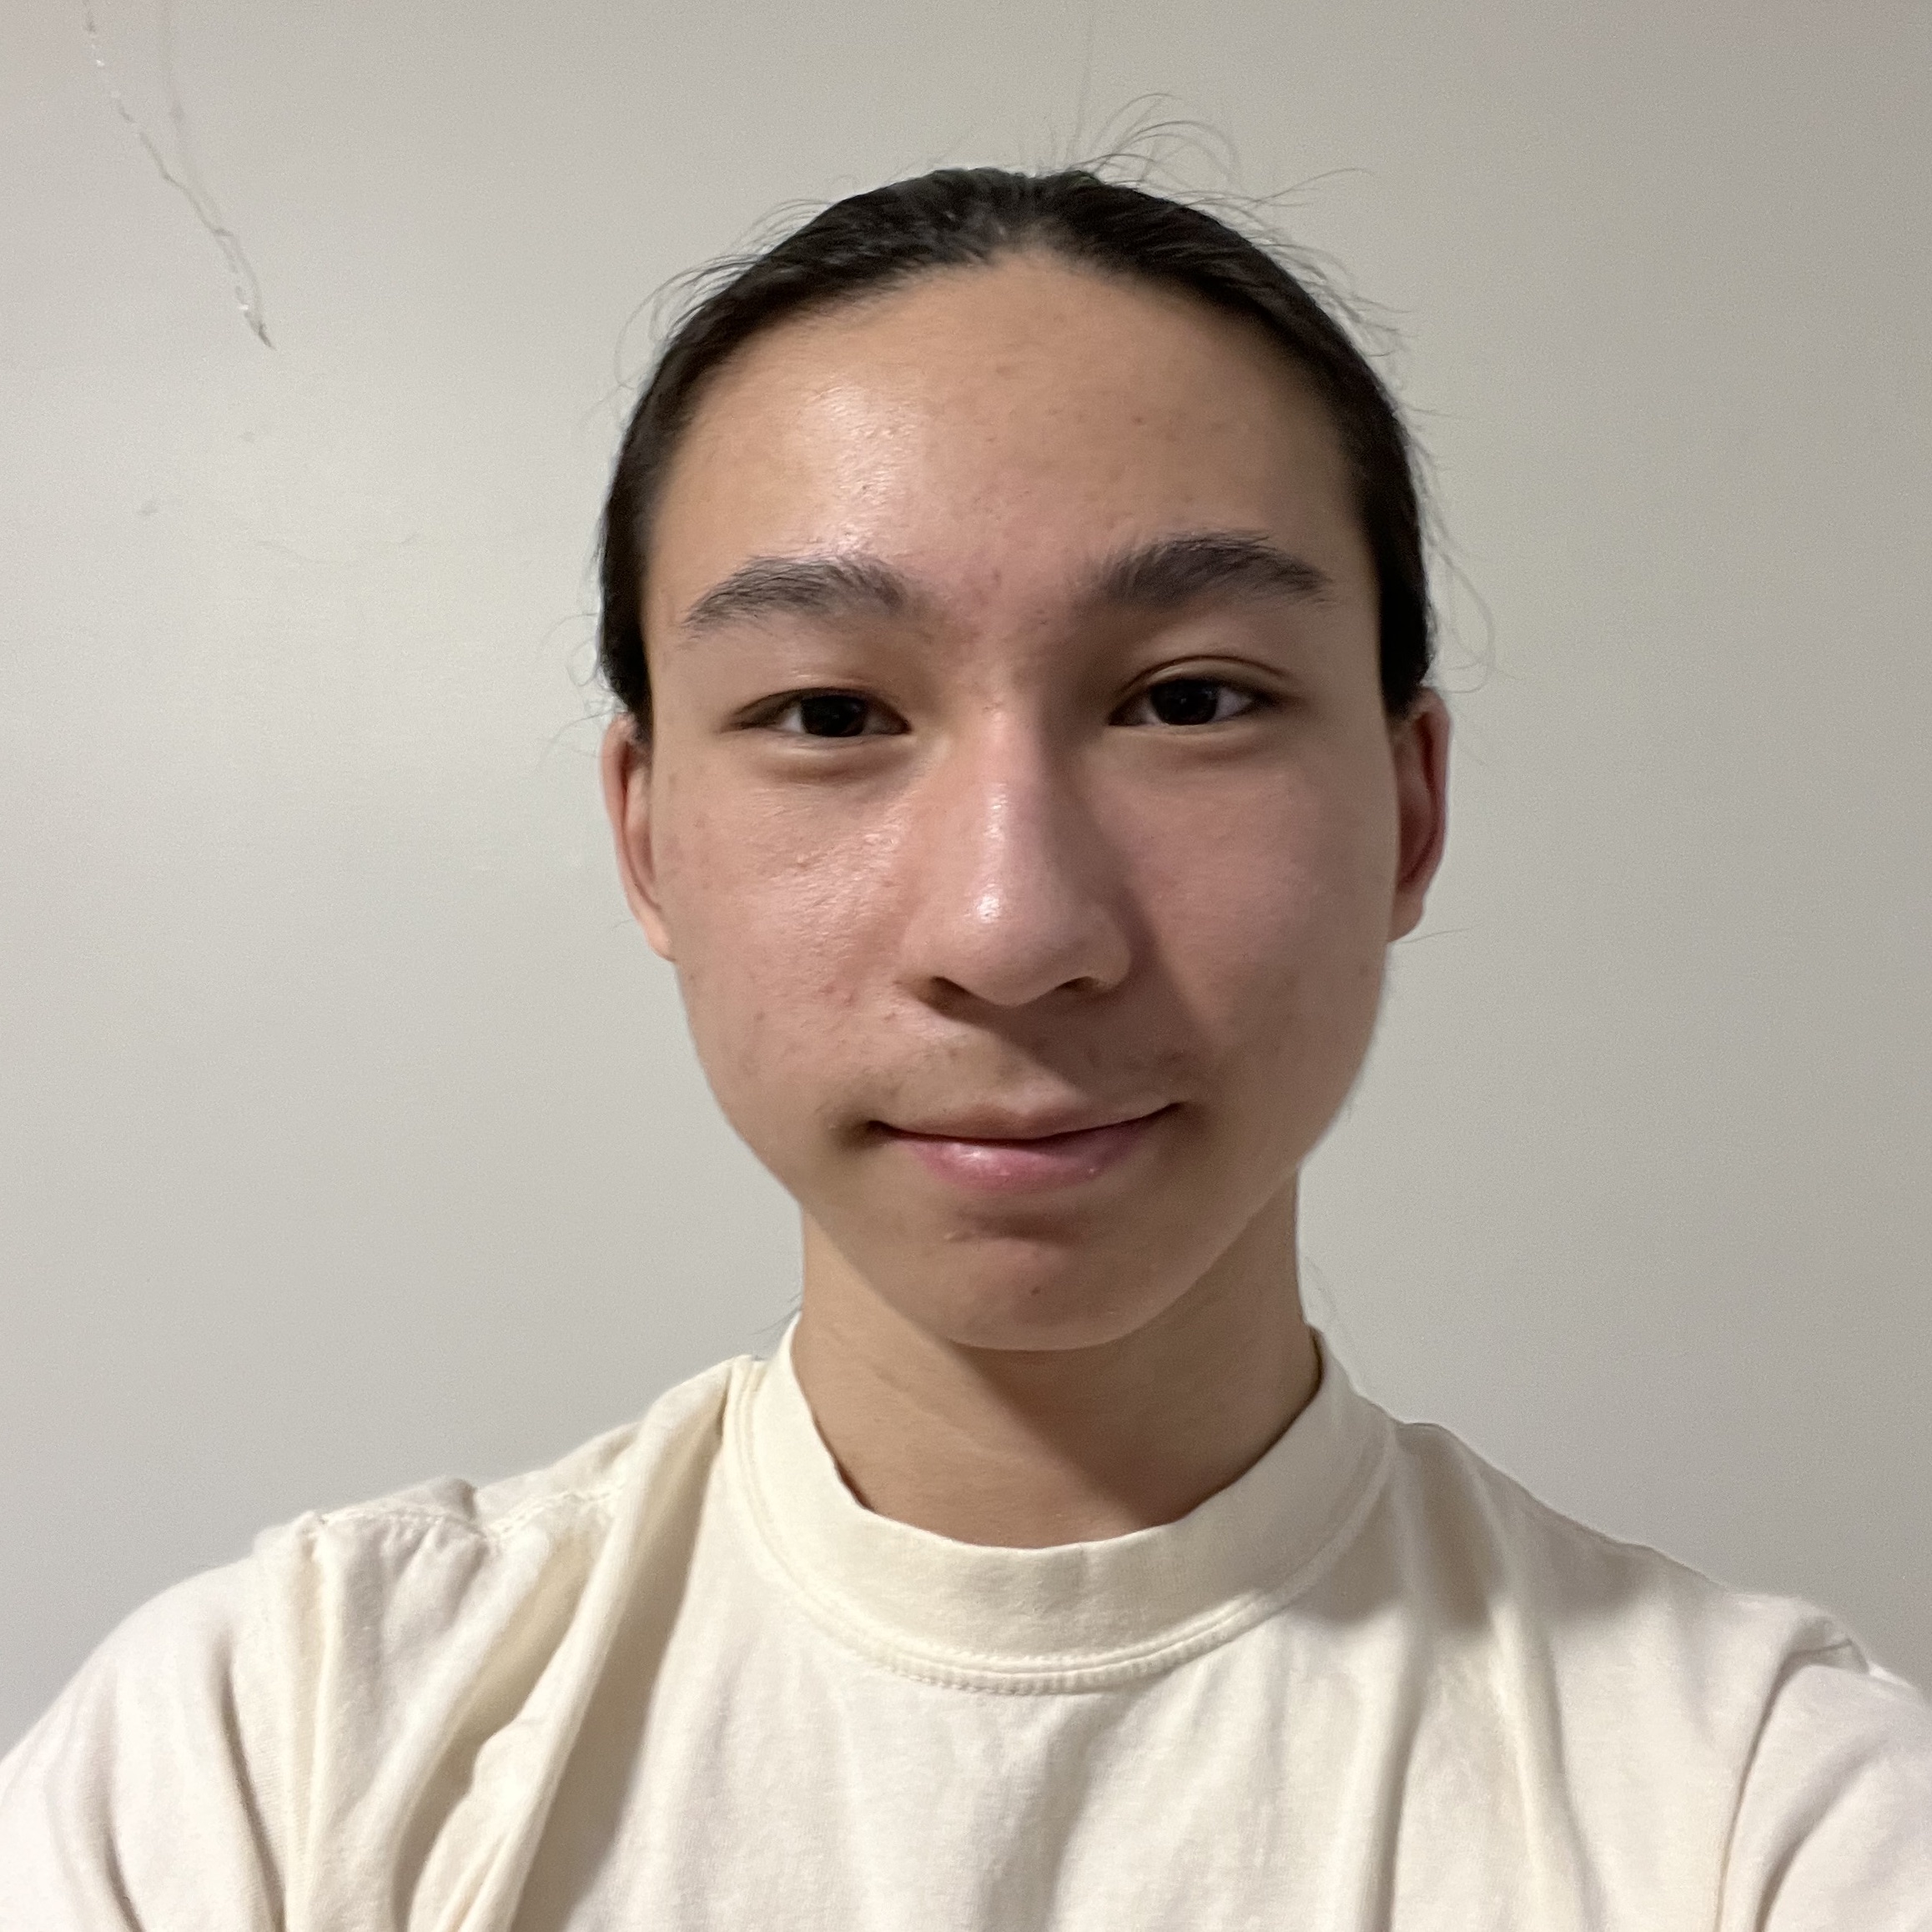 Andre Chen is a computer science student who writes software for the AutoAquaponics website.LINKEDINLINKhttps://www.linkedin.com/in/andrechen2004/